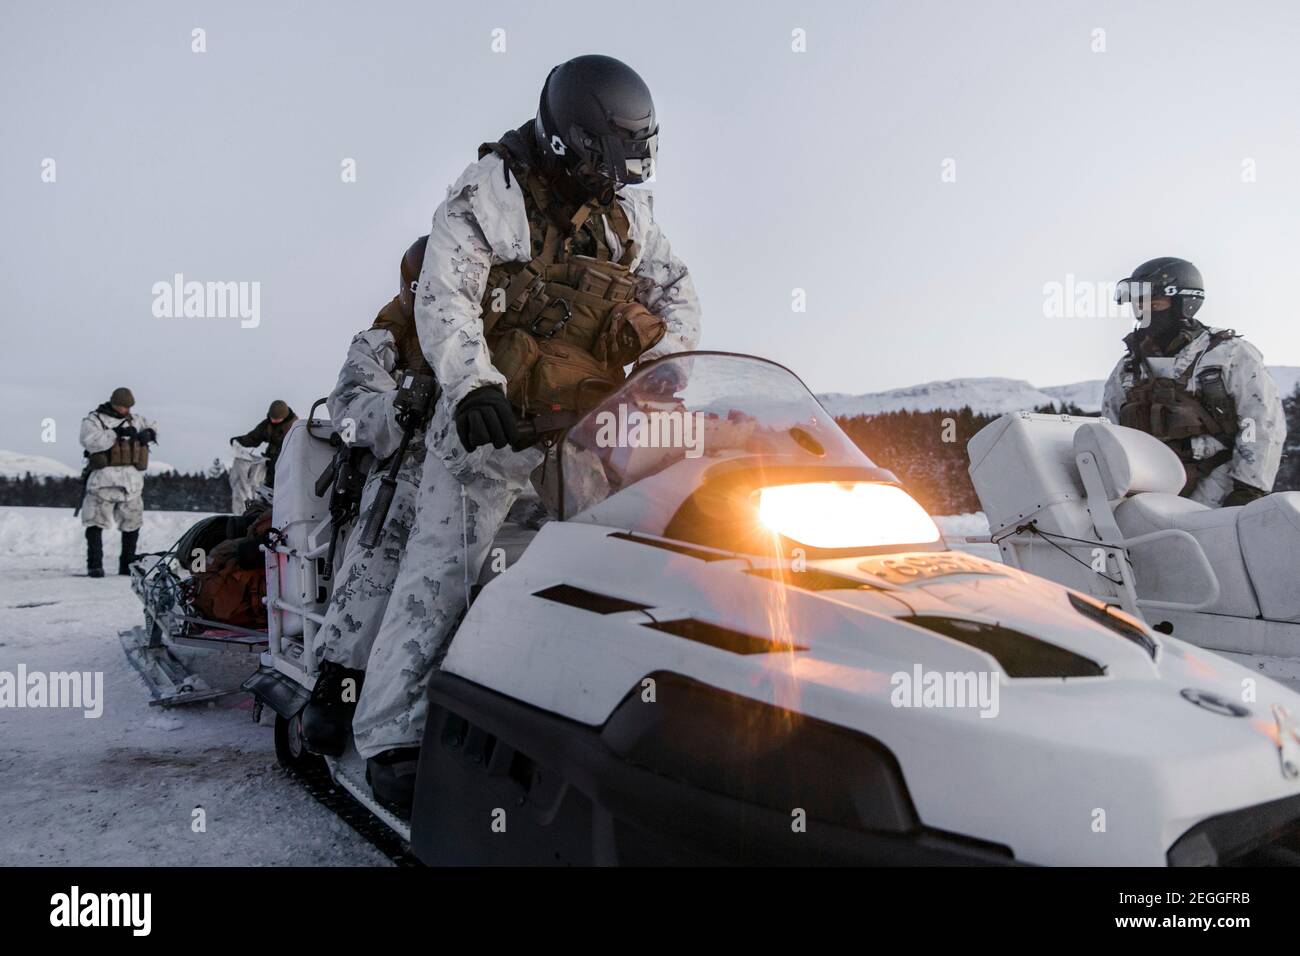 U.S. Marines with Marine Rotational Force Europe prepare for cold weather snowmobile training February 17, 2021 in Setermoen, Norway. Stock Photo